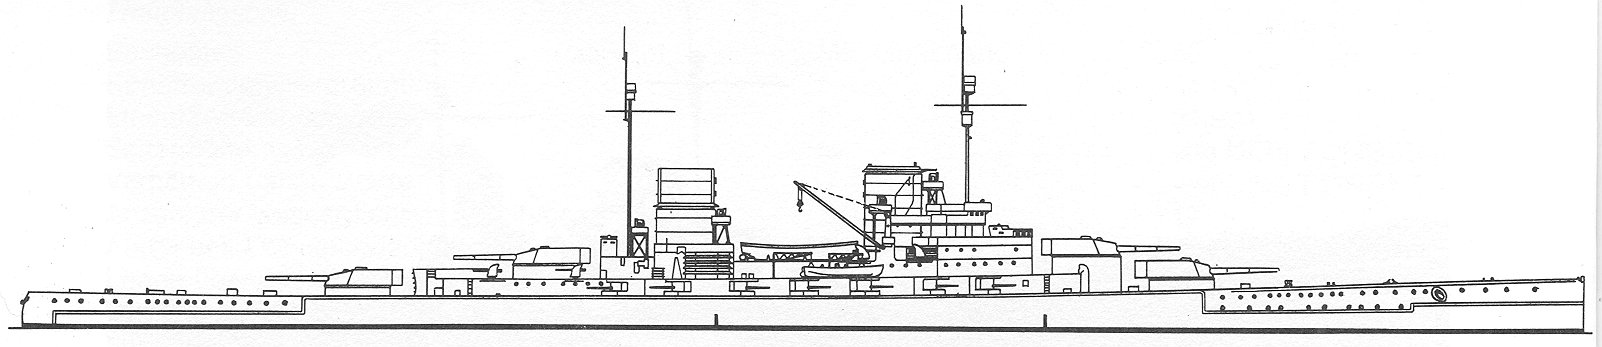 SMS_Lutzow-linedrw.jpg